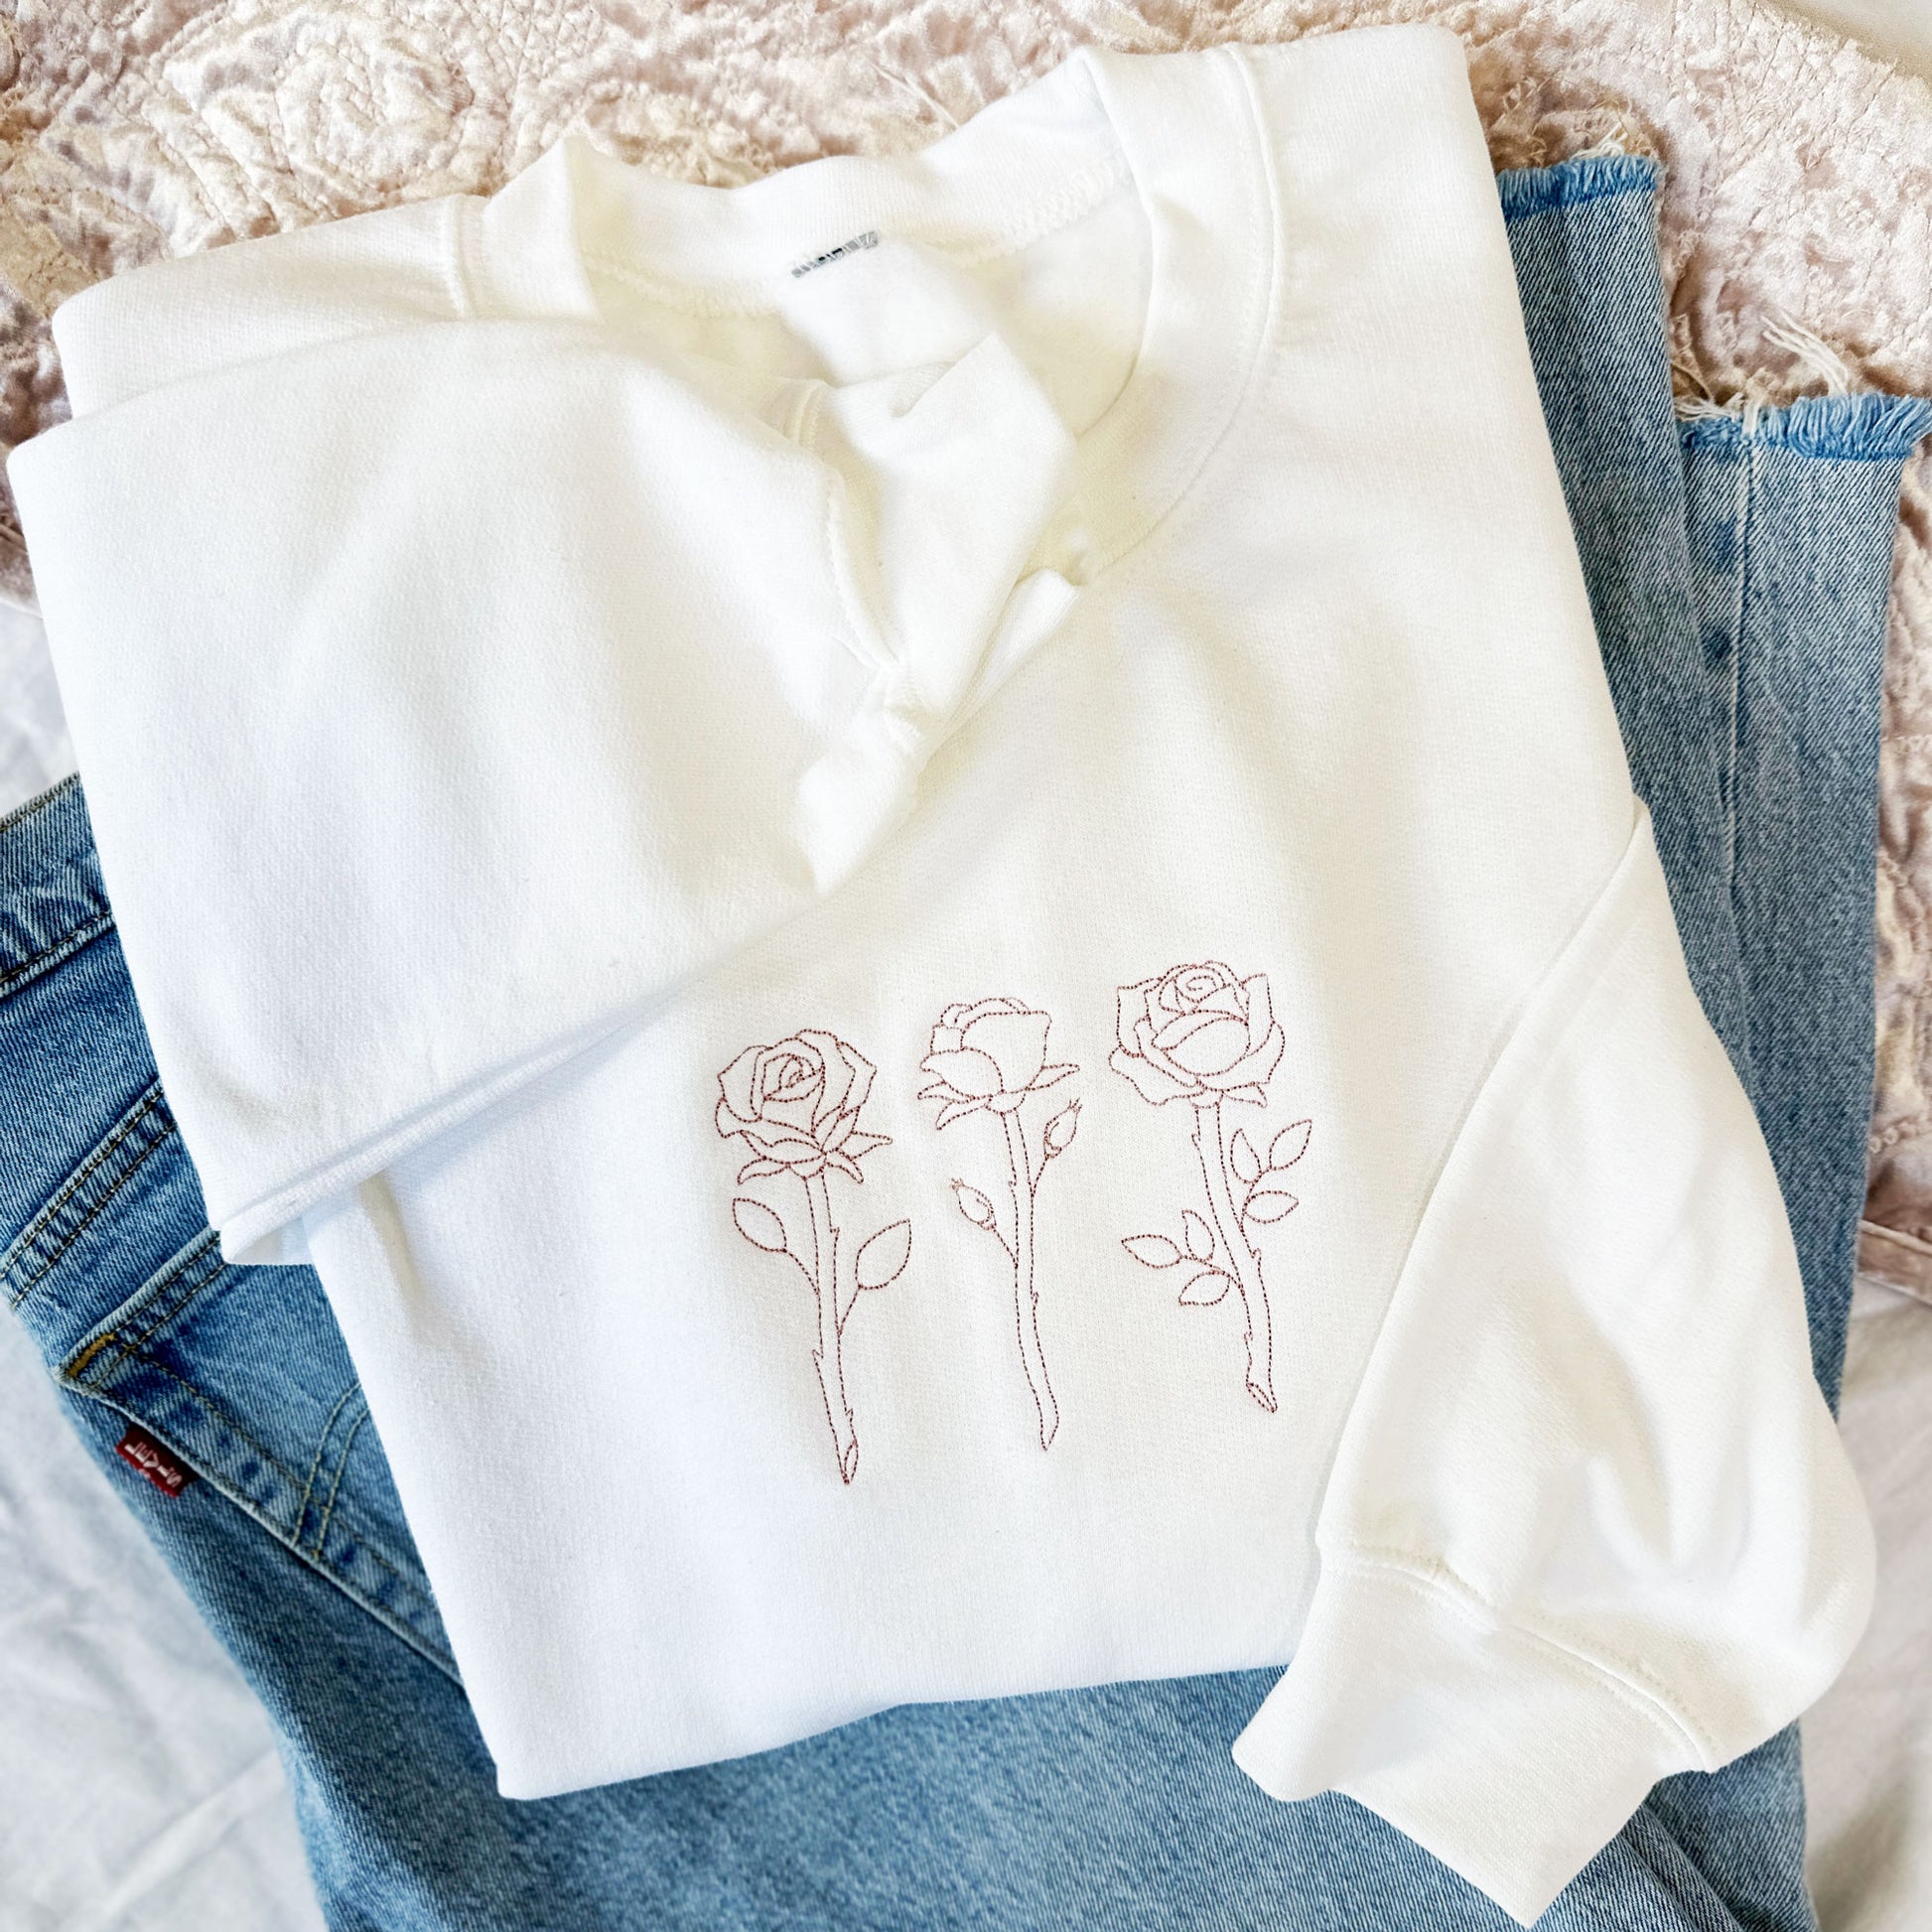 blue jeans paired with a white crewneck with roses embroidered in a pink thread on the center chest